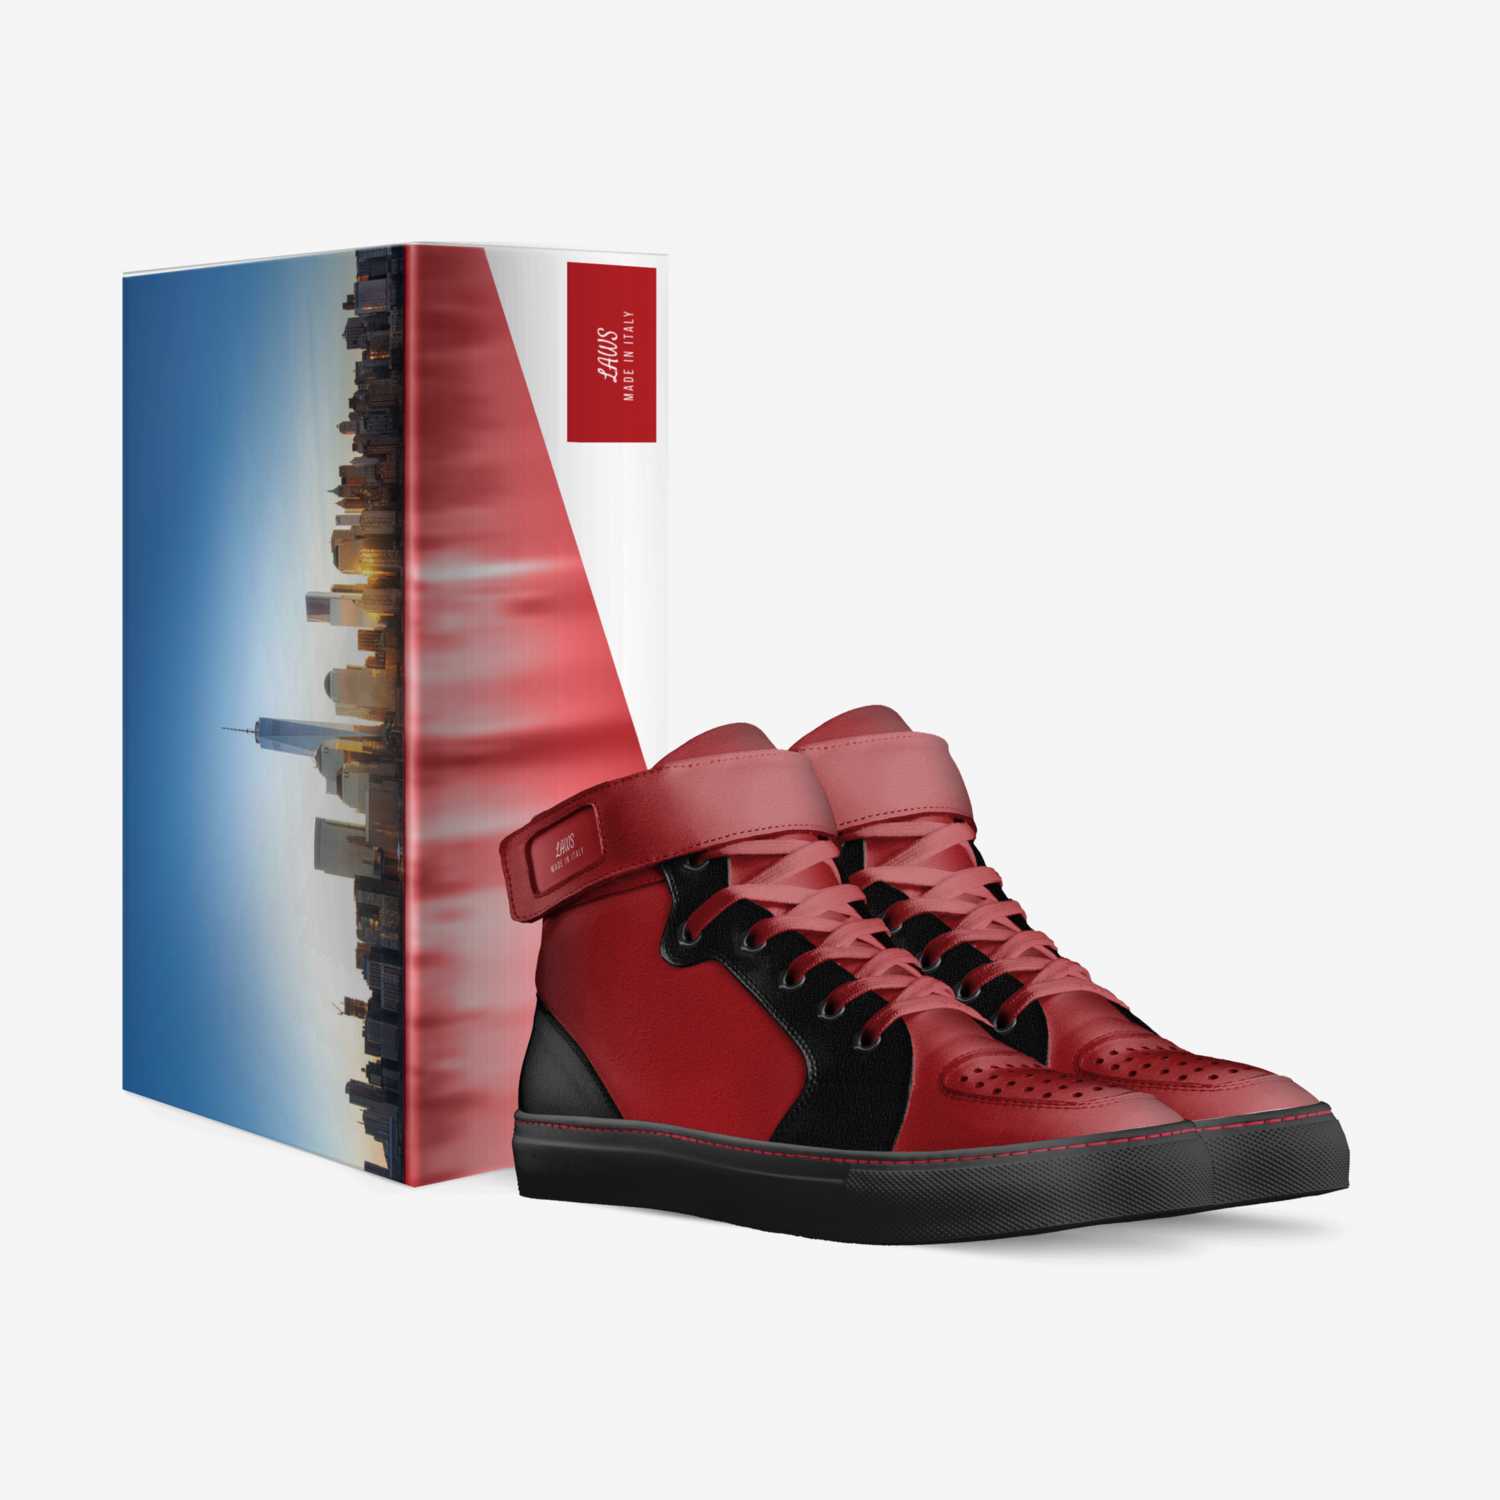 Lawbreakers custom made in Italy shoes by Lawson Wachel | Box view